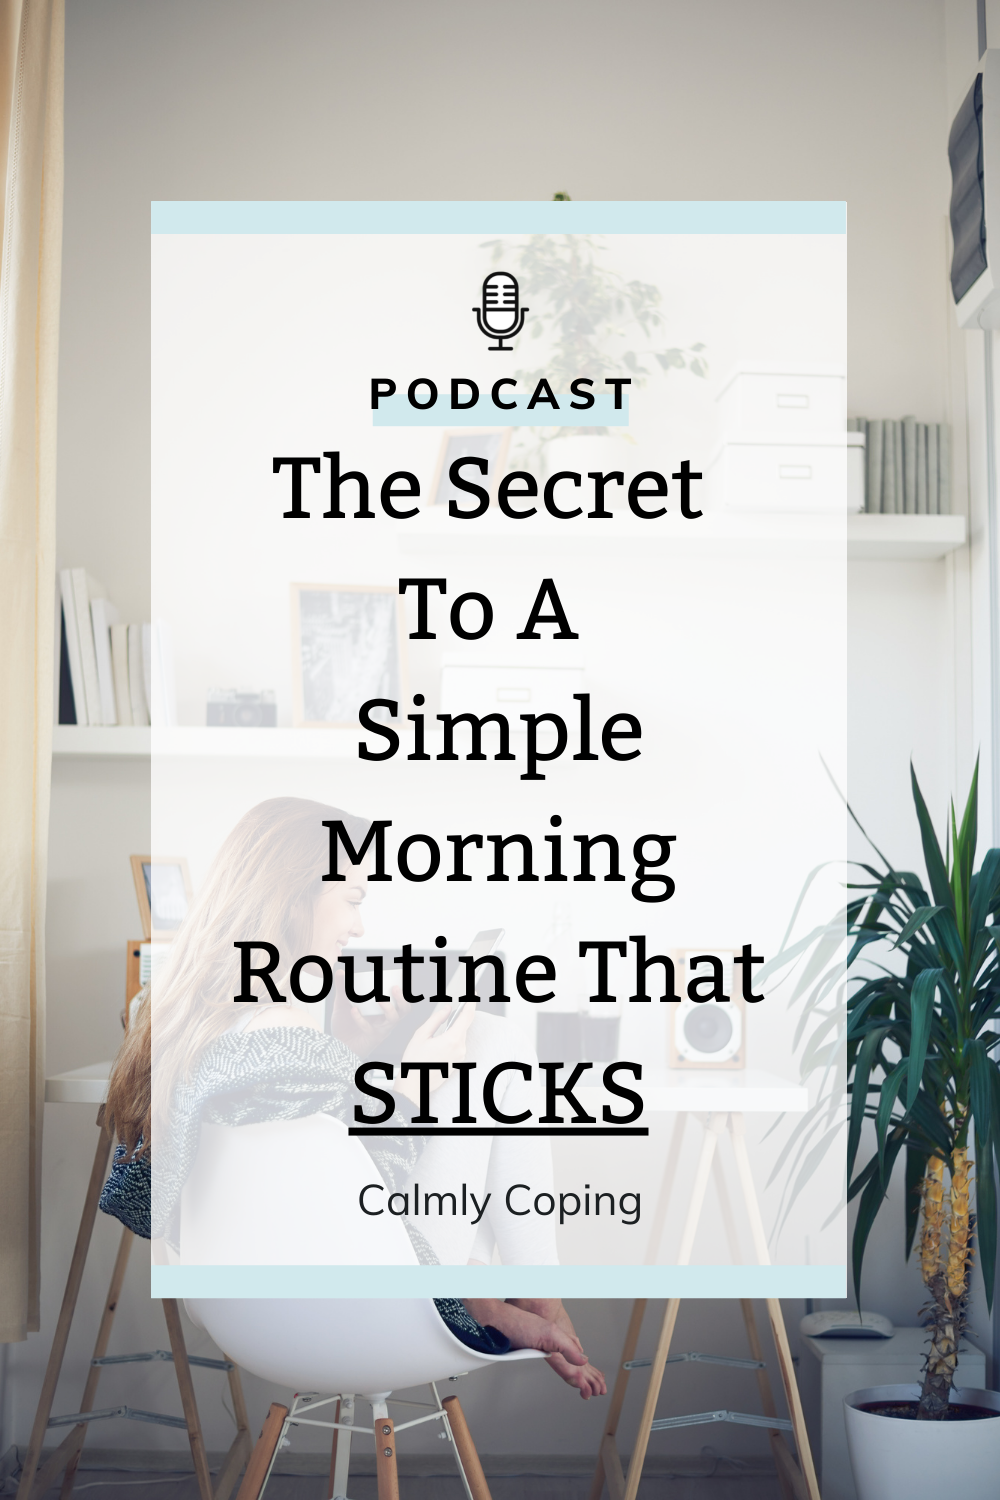 The Secret To A Simple Morning Routine That Sticks